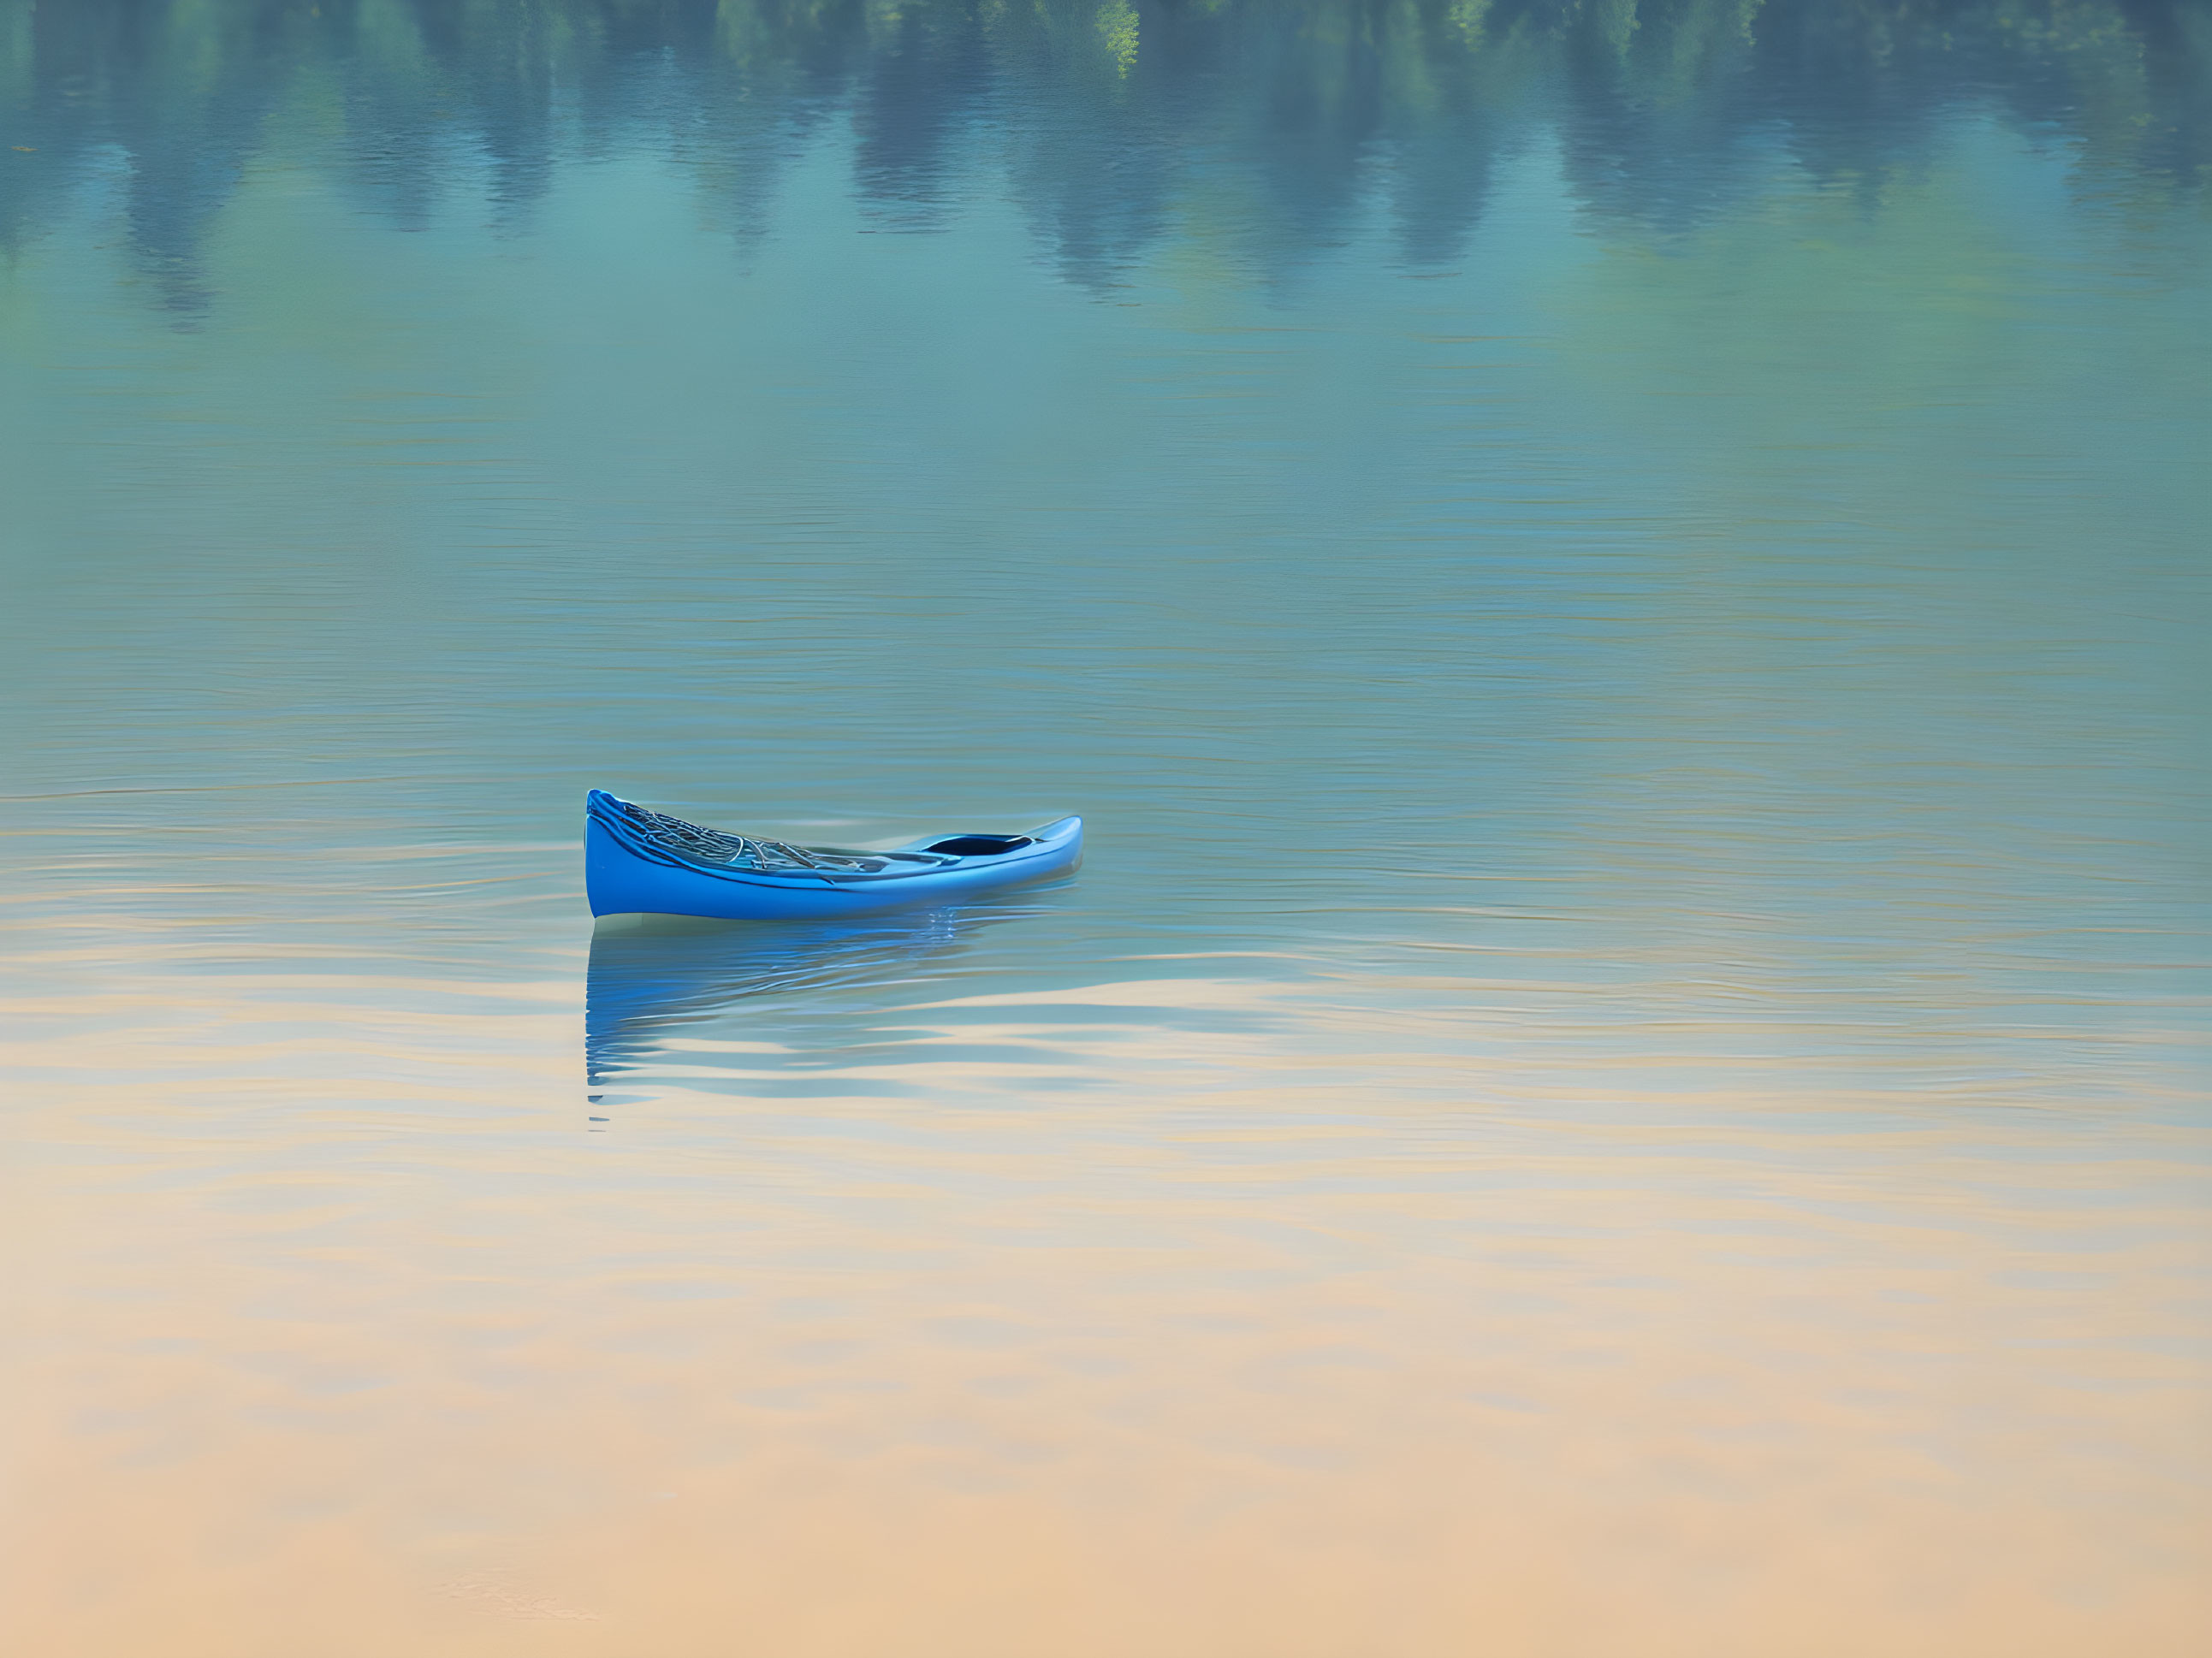 Tranquil Waters: A Blue Canoe's Solitude